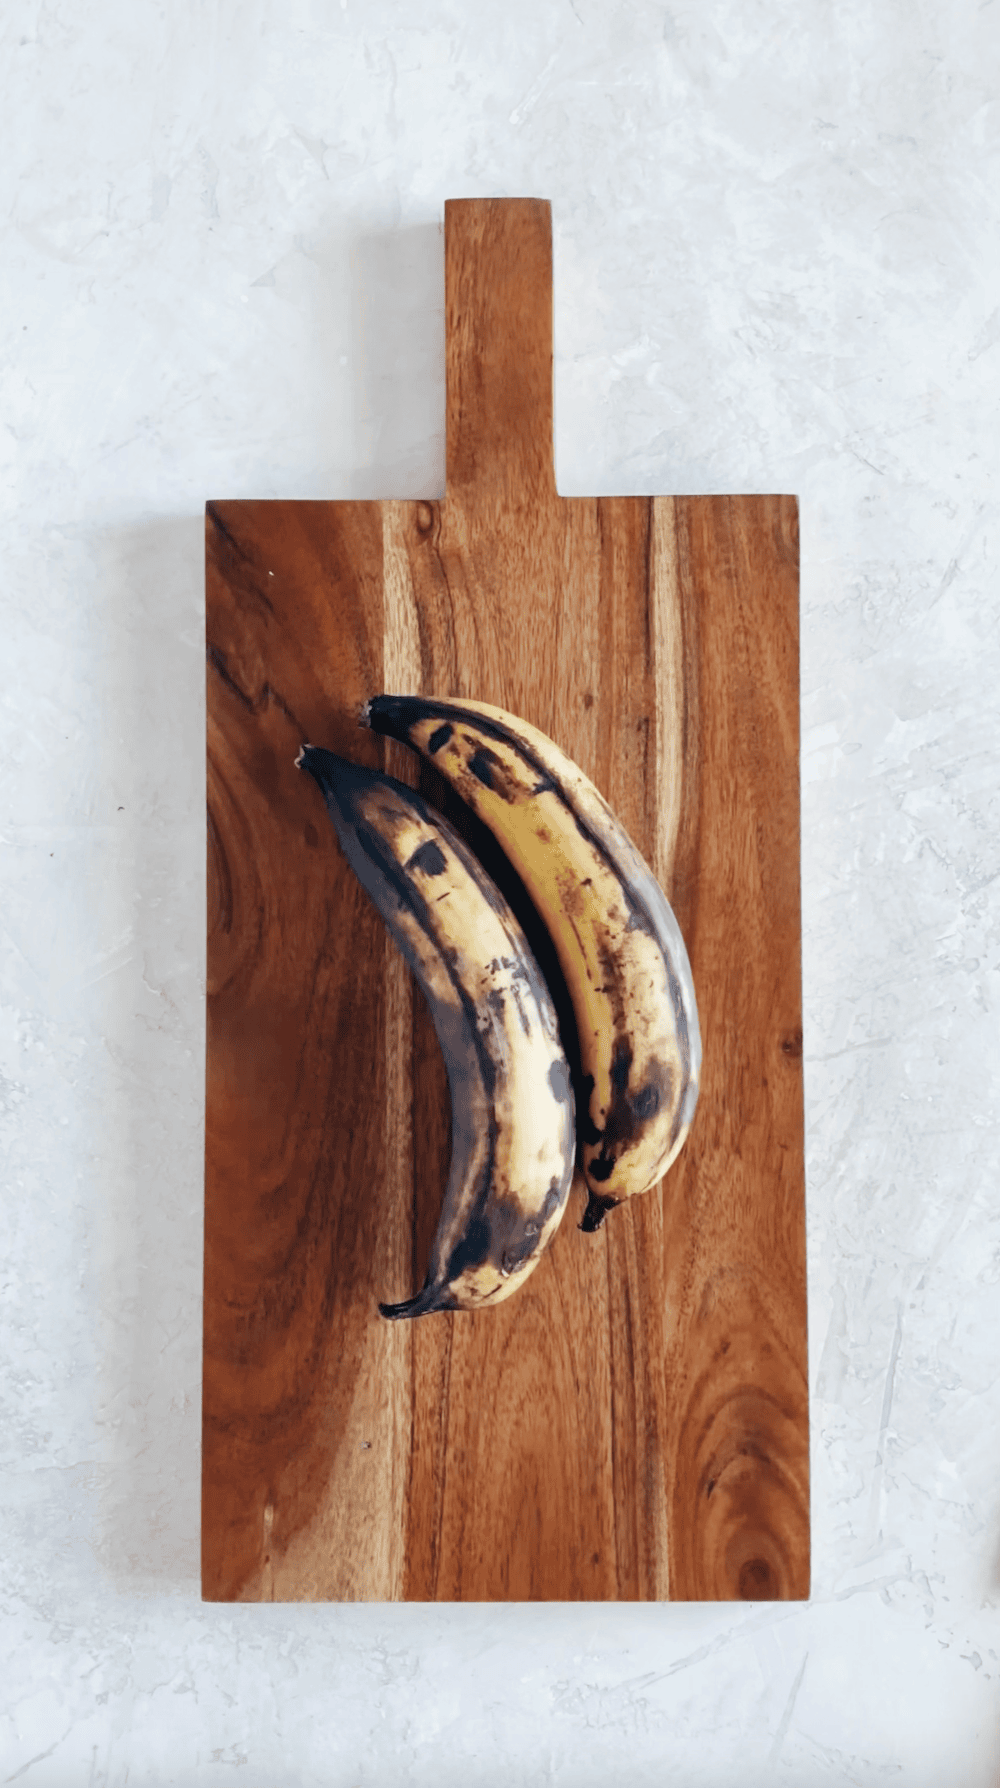 yellow and black ripe plantains on a wooden block